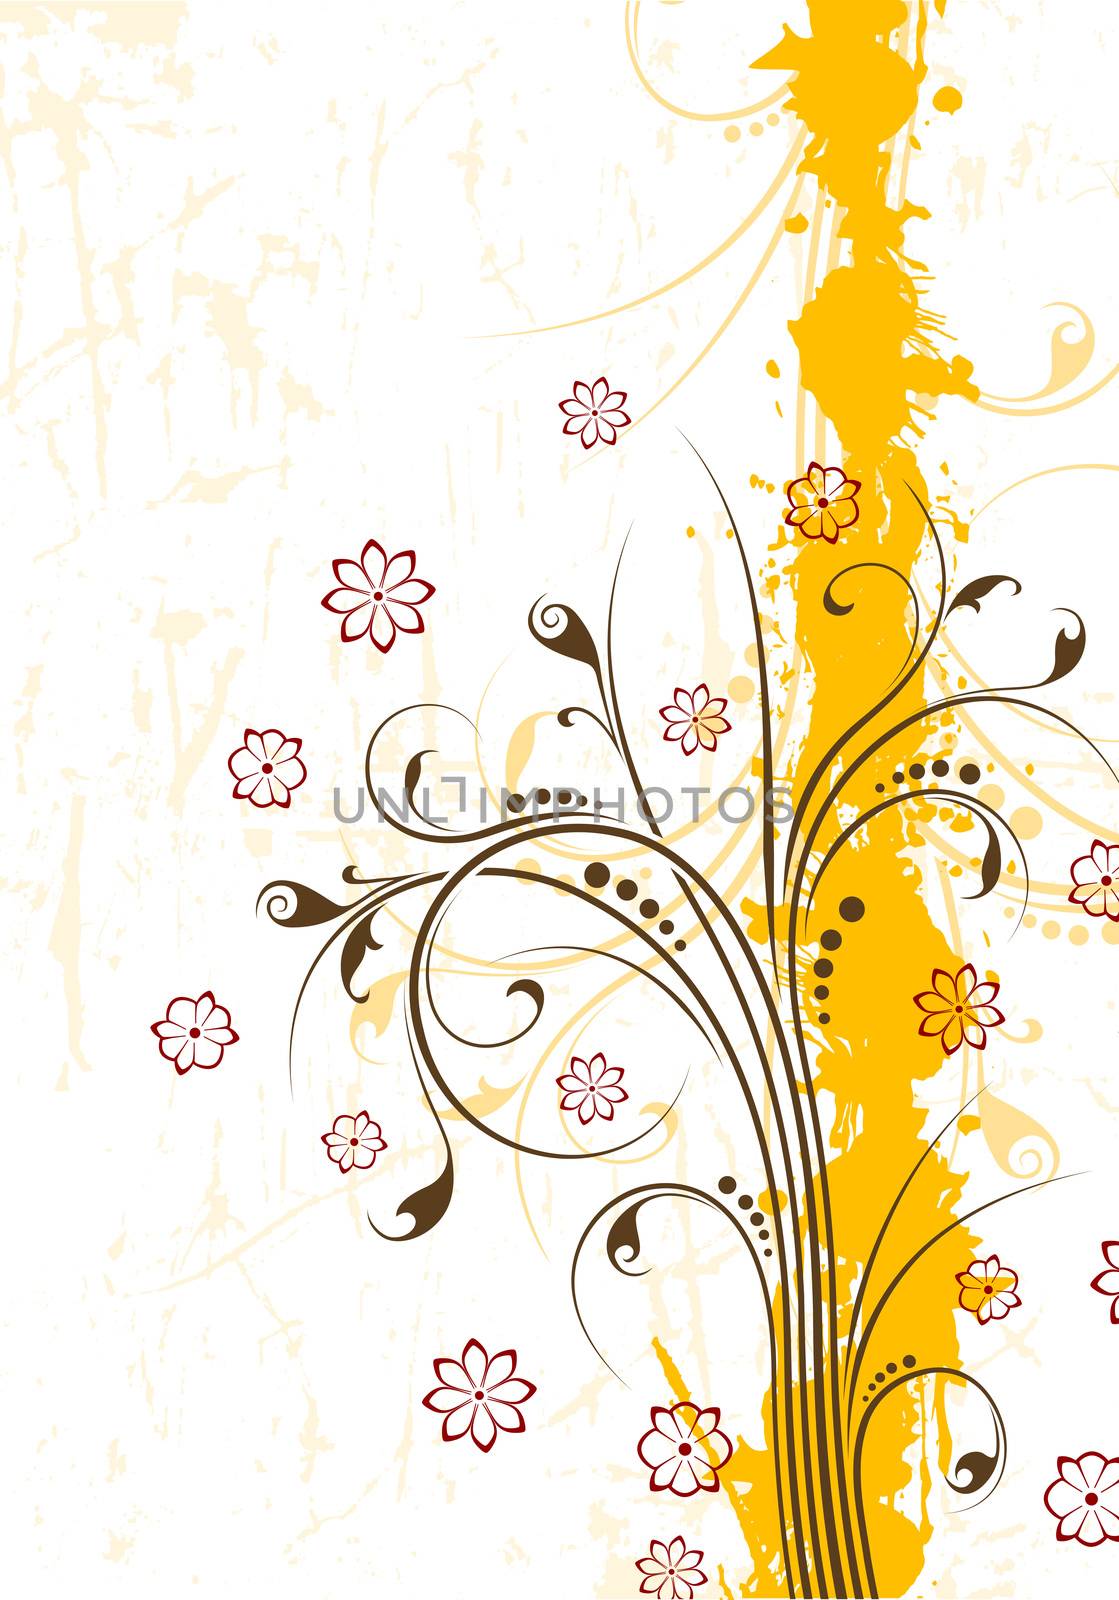 Abstract Grunge Floral Background by WaD